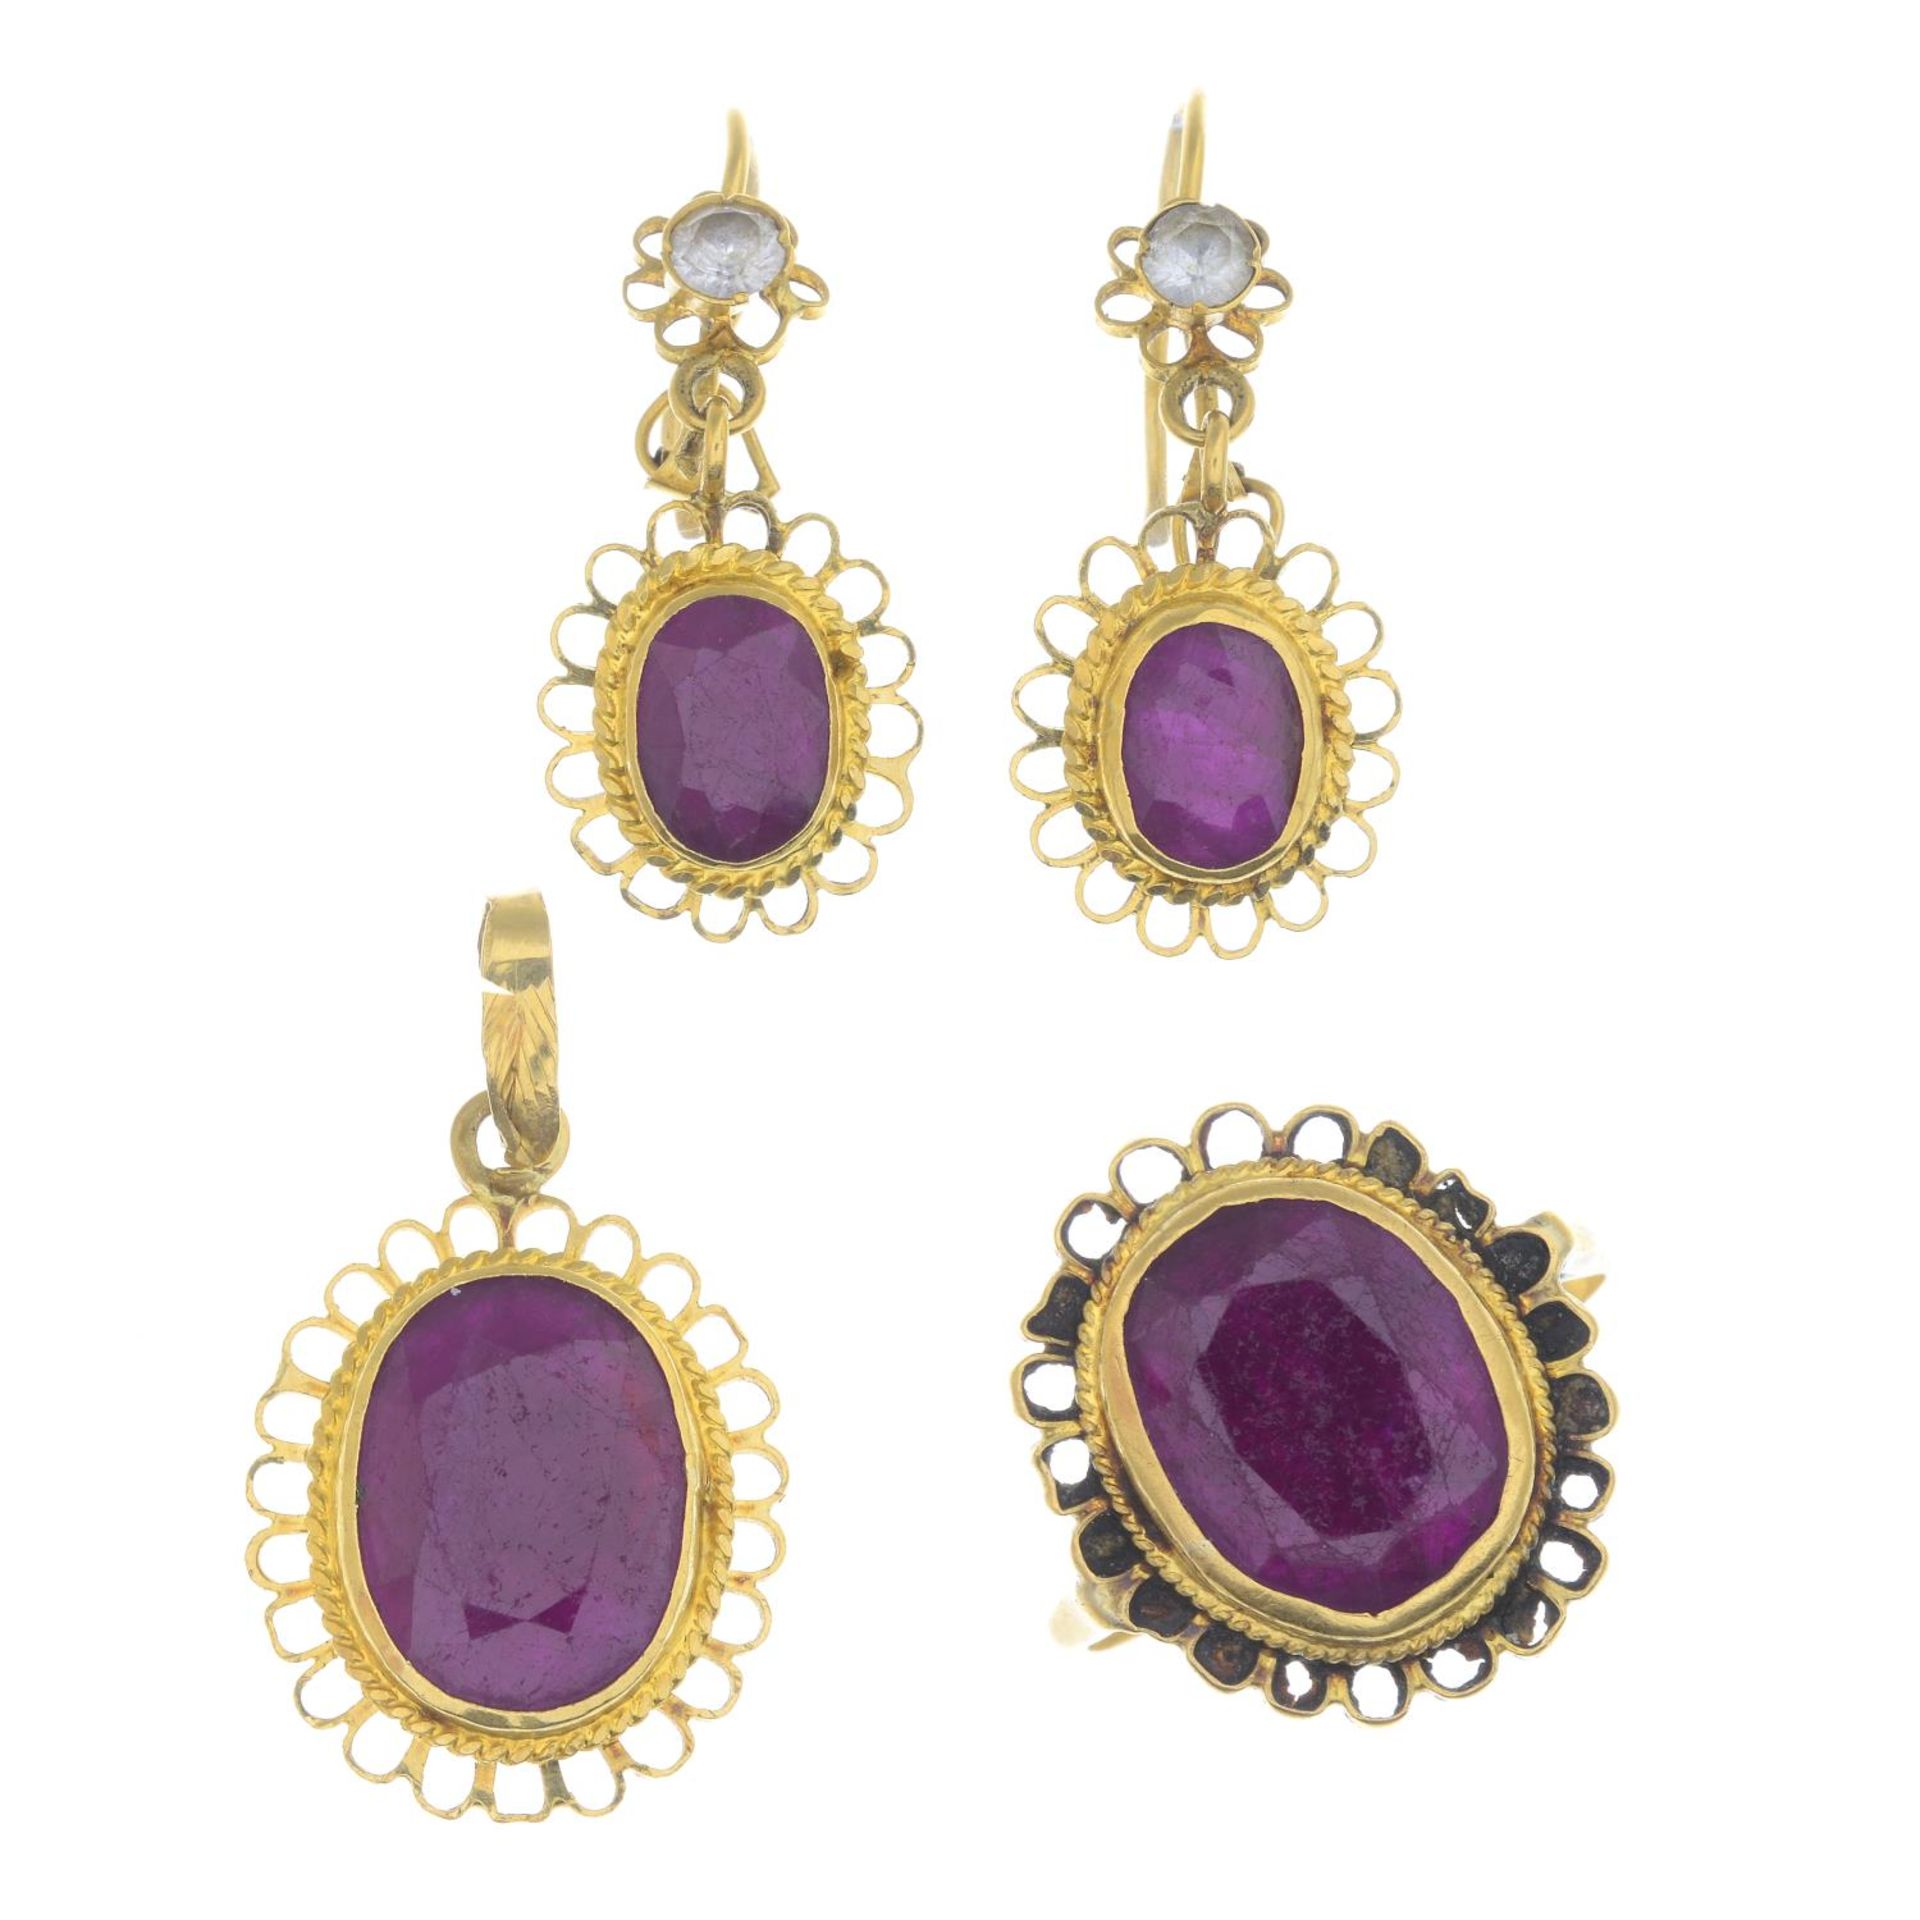 A set of glass-filled ruby and paste jewellery,